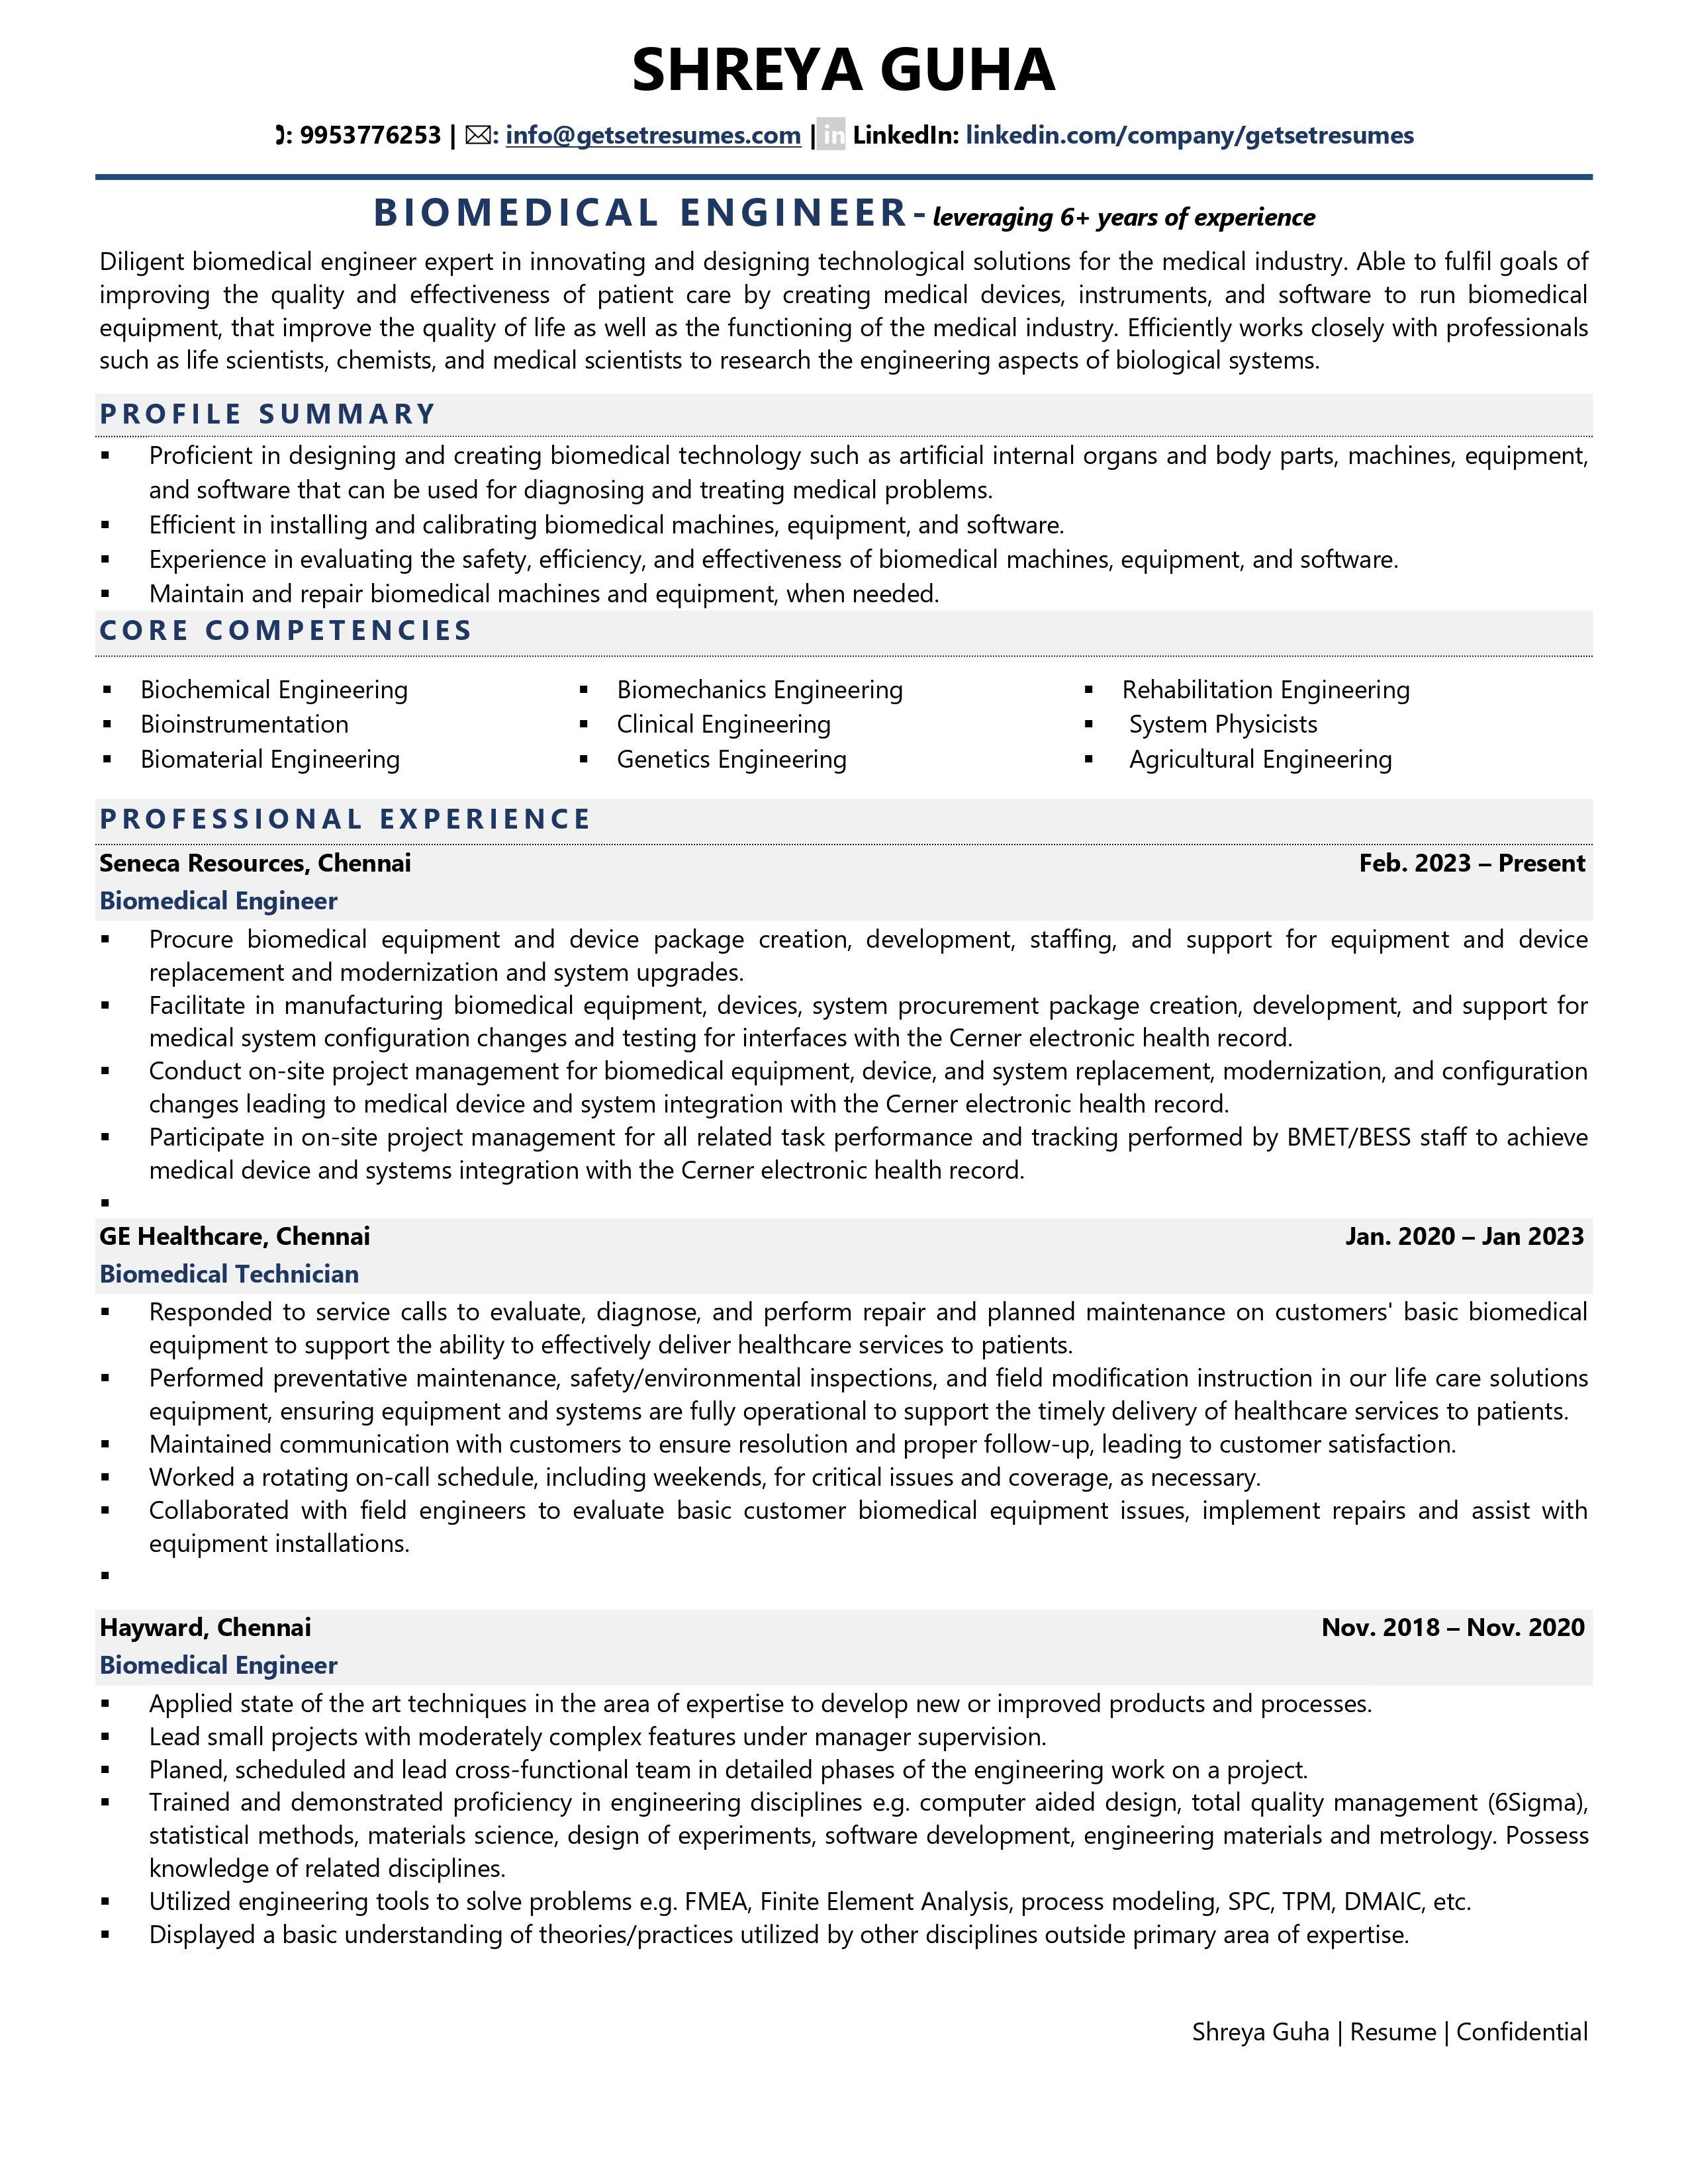 Biomedical Engineer Resume Examples & Template (with job winning tips)